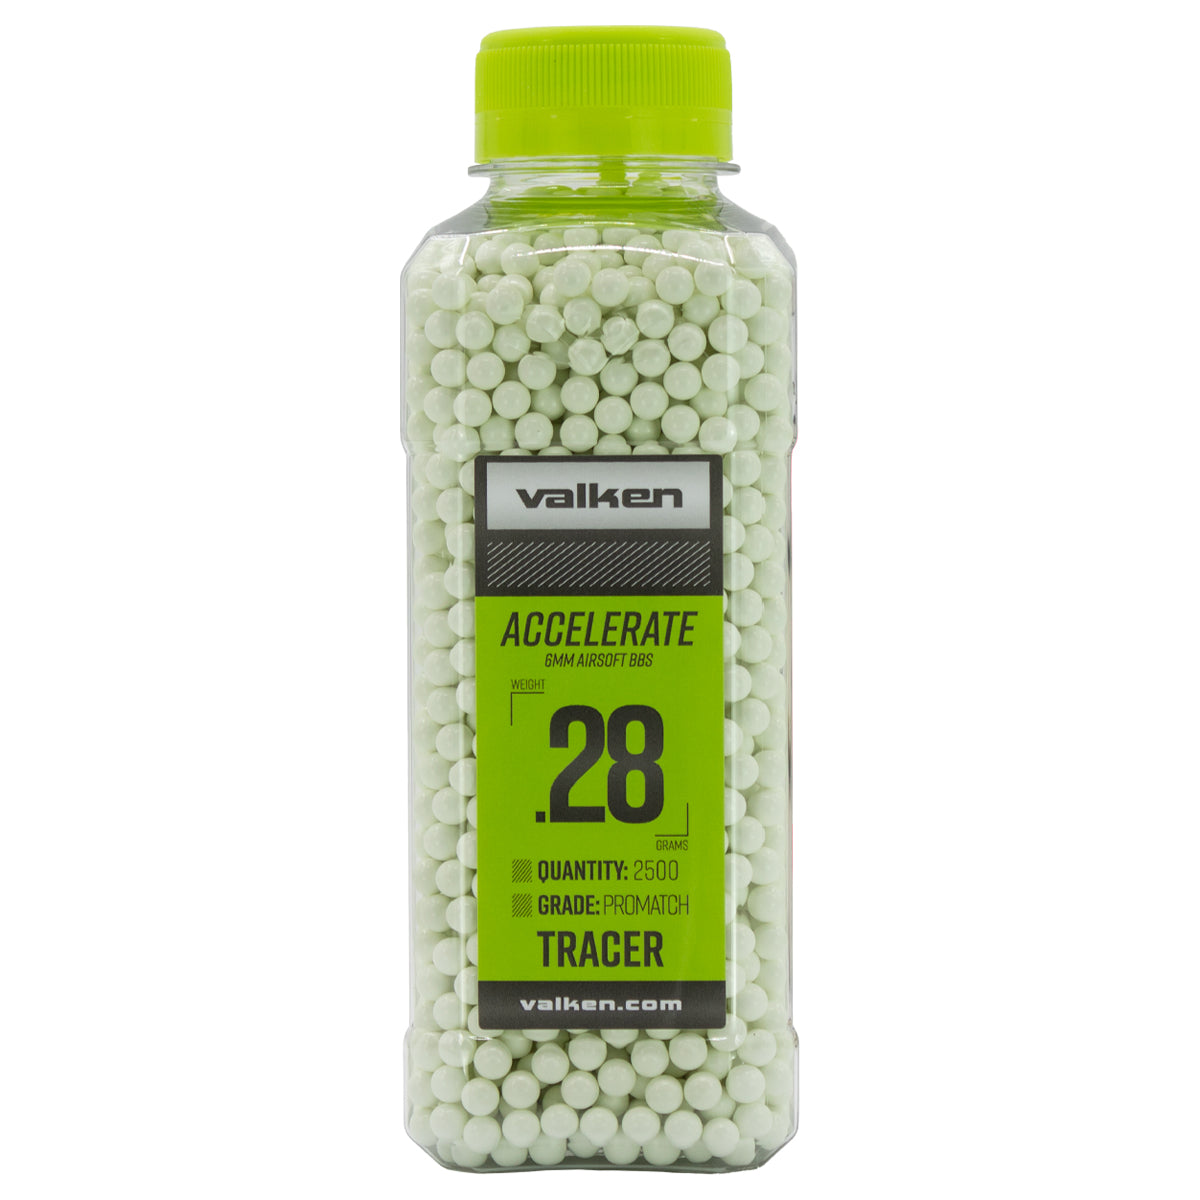 Valken Accelerate Tracer 0.28g Airsoft BBs - 2500ct